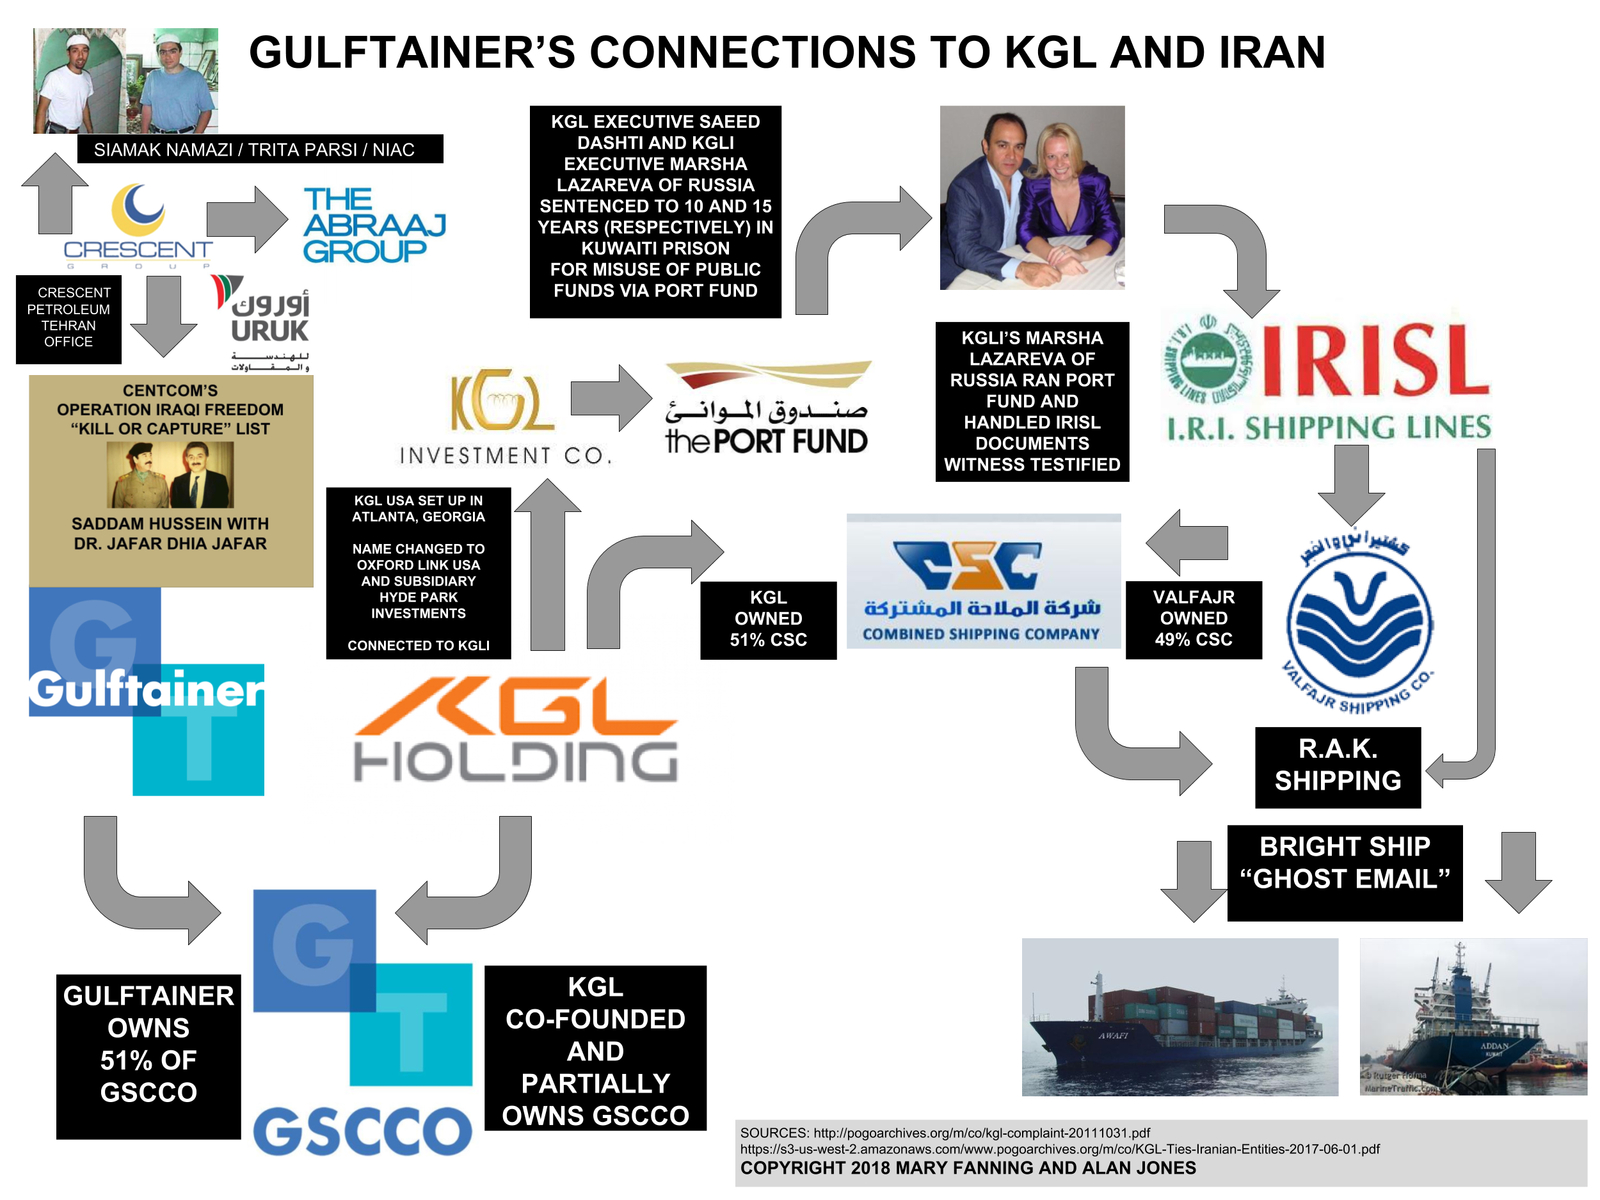 Gulftainer's connections to KGL and Iran